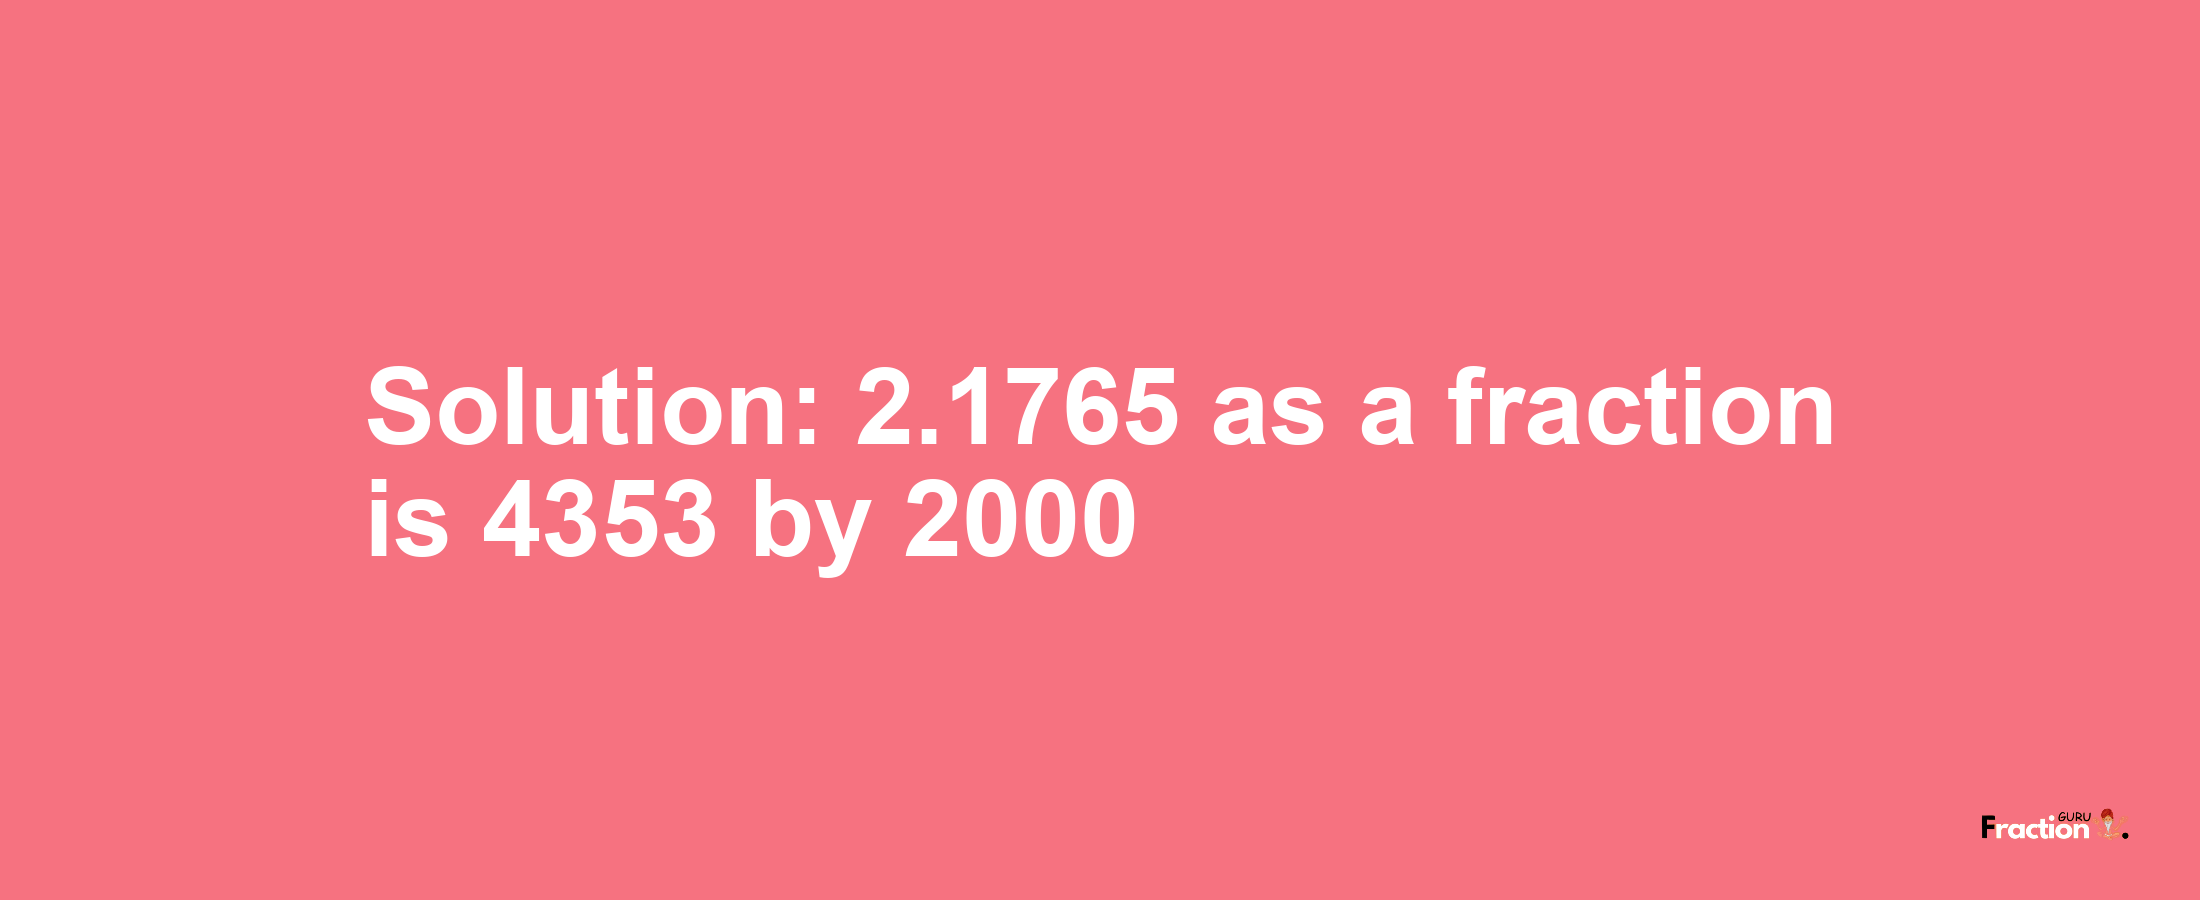 Solution:2.1765 as a fraction is 4353/2000